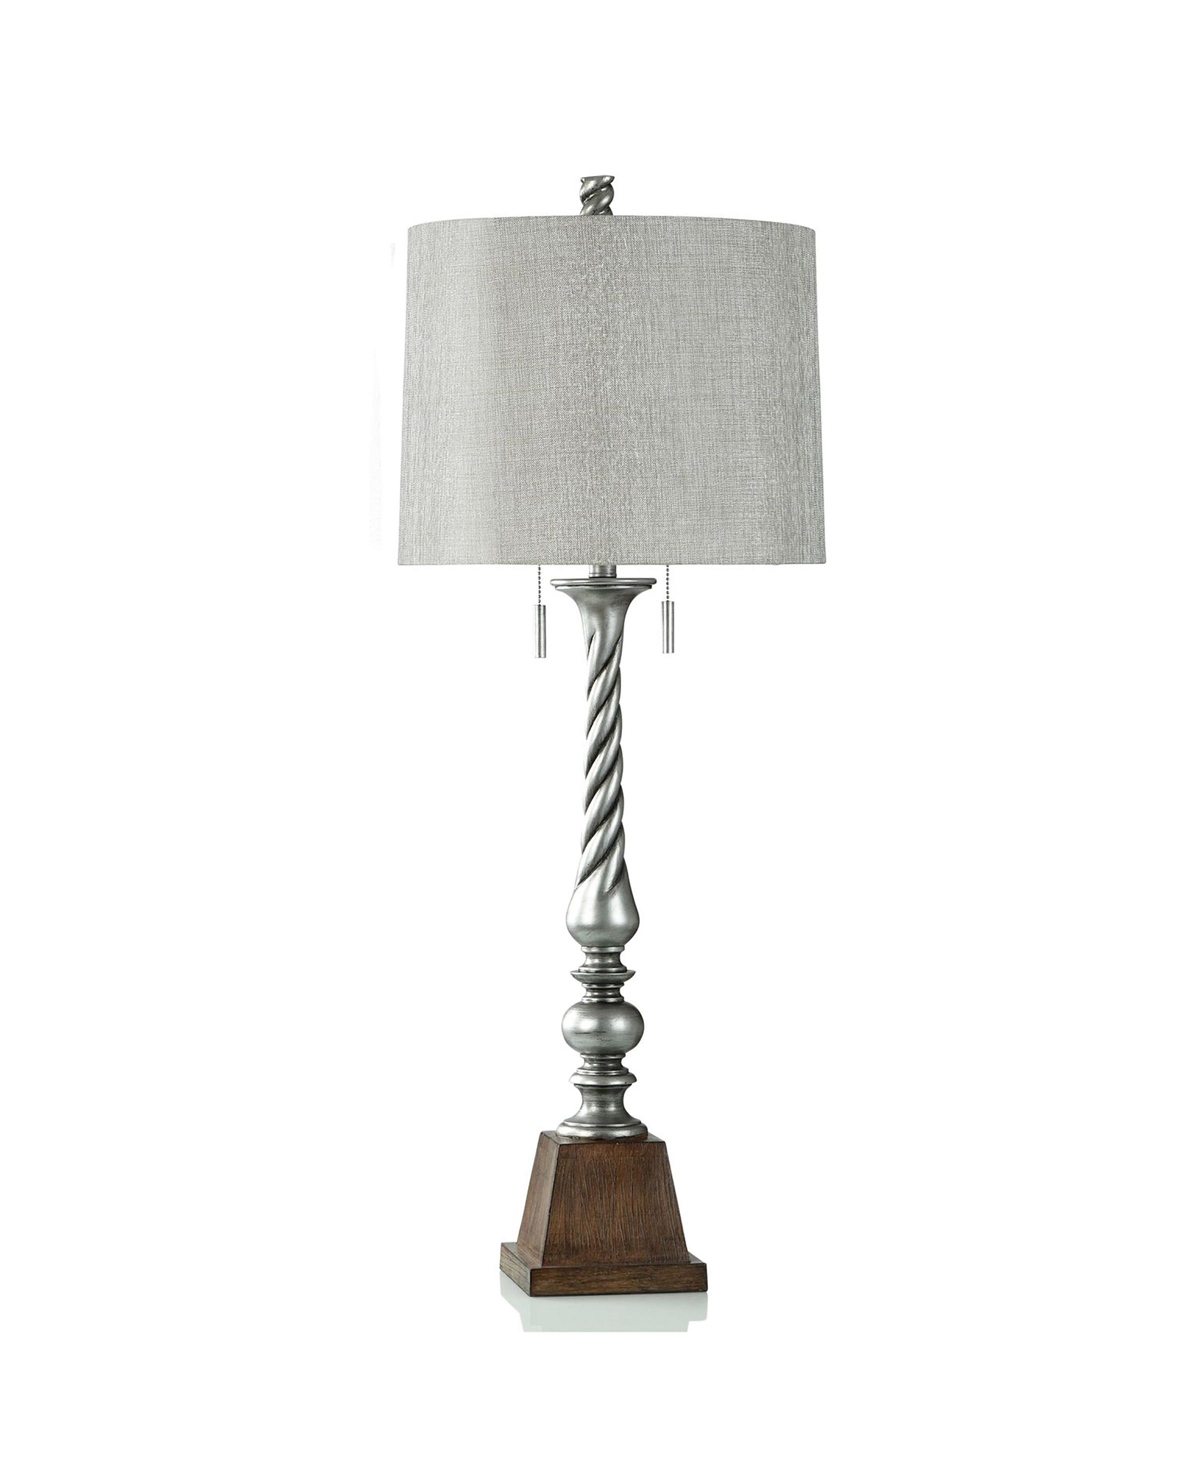 Stylecraft Home Collection 40.87" India Pedestal Painted Swirl Table Lamp In Metallic Silver,brown Faux Wood